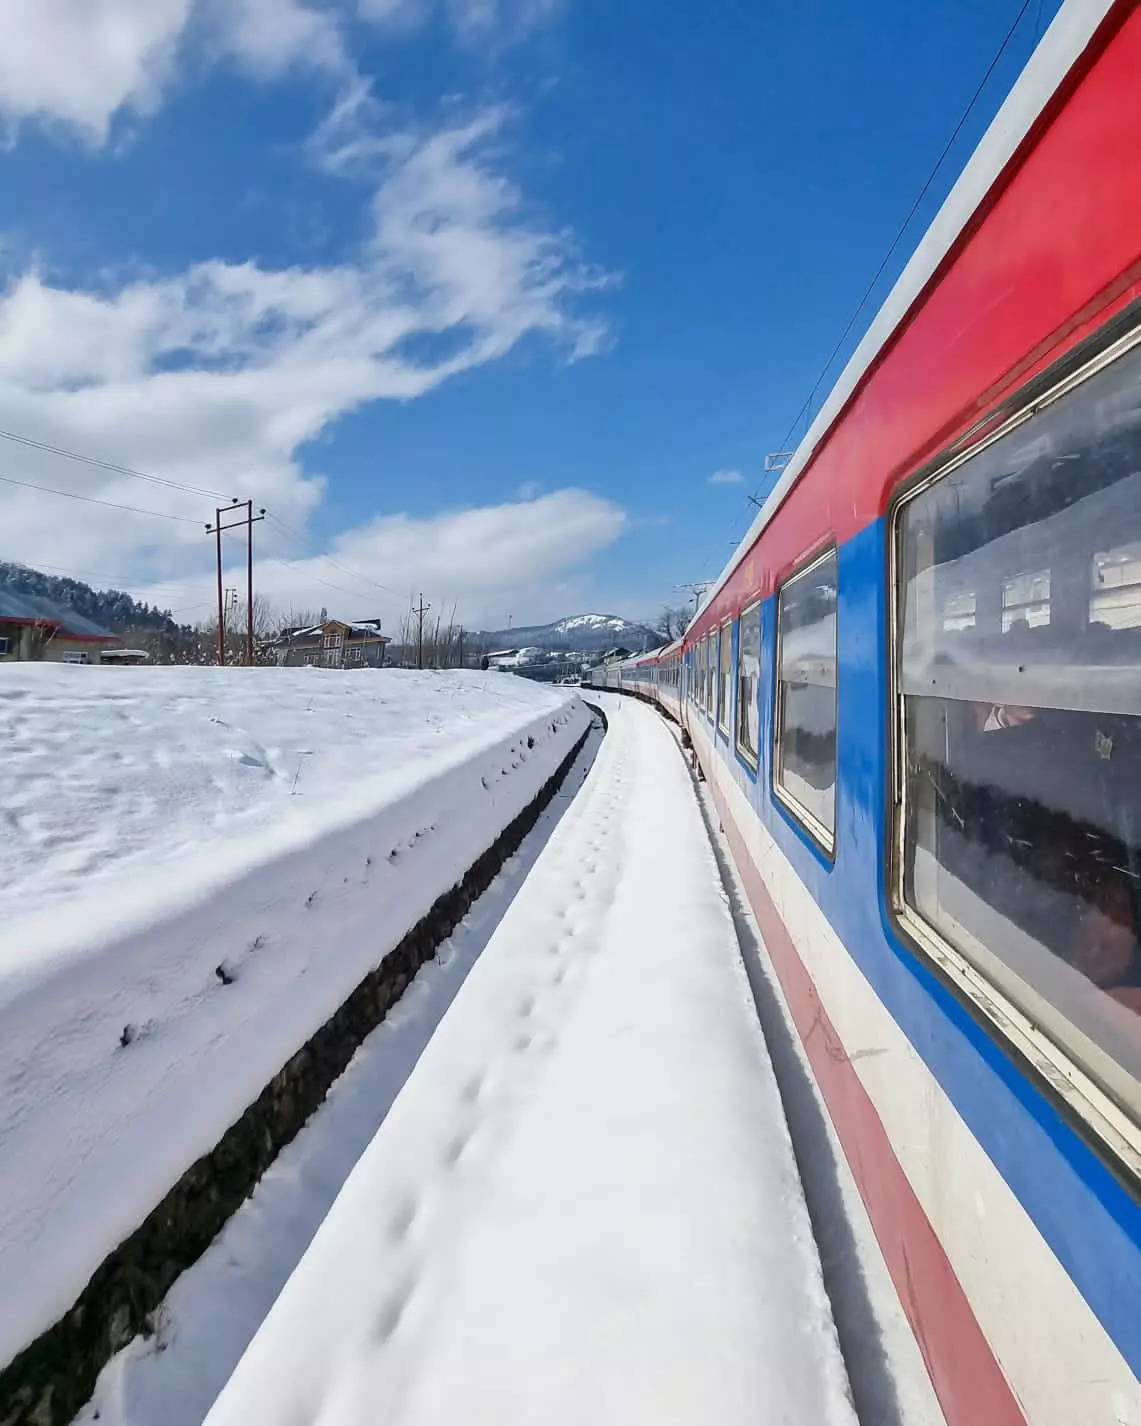 Train passes through snow-covered station